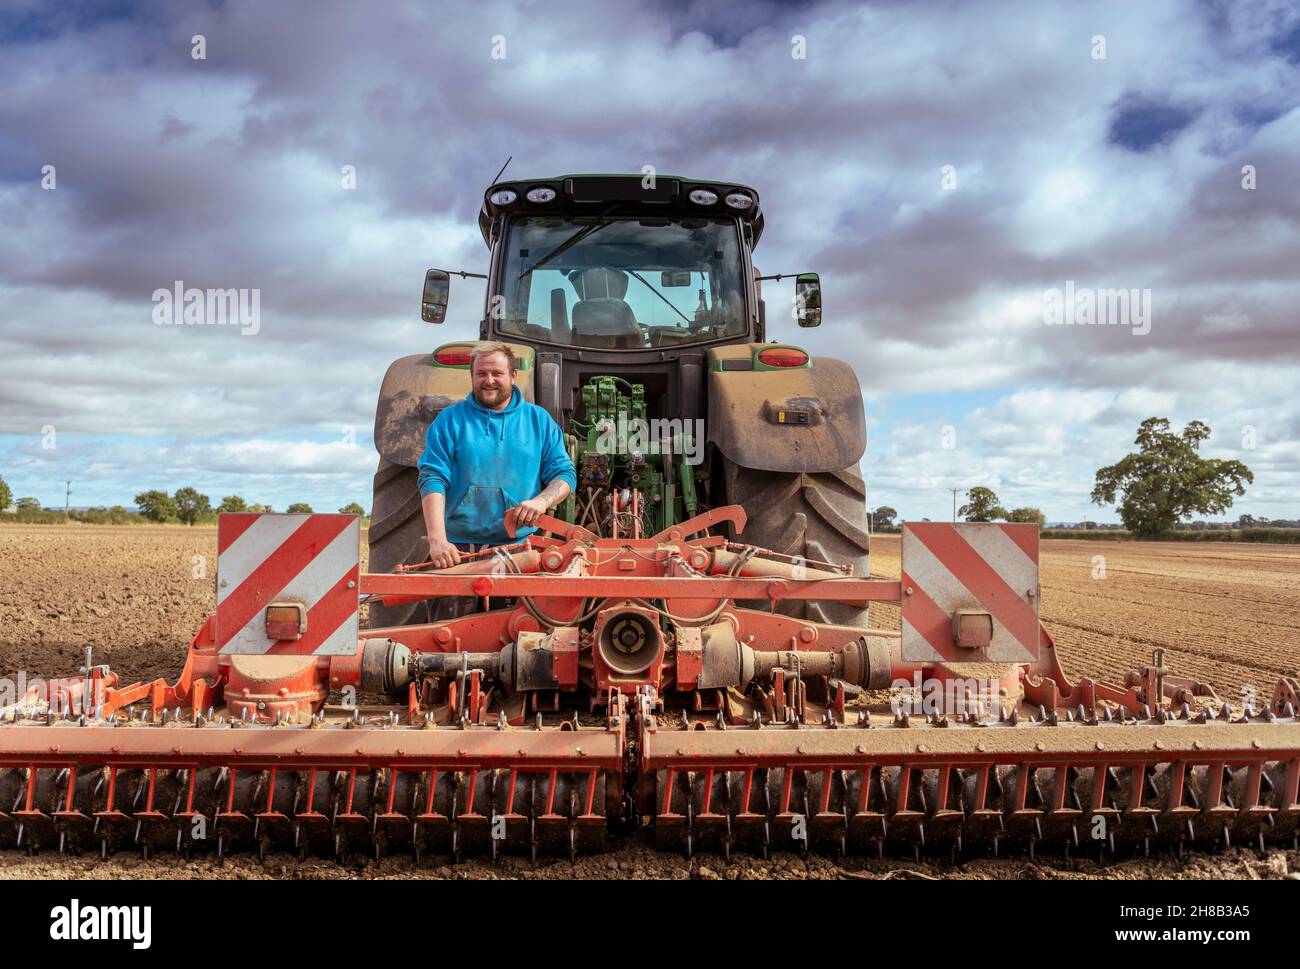 Farmer at tractor with cultivating plough in plowed field Stock Photo